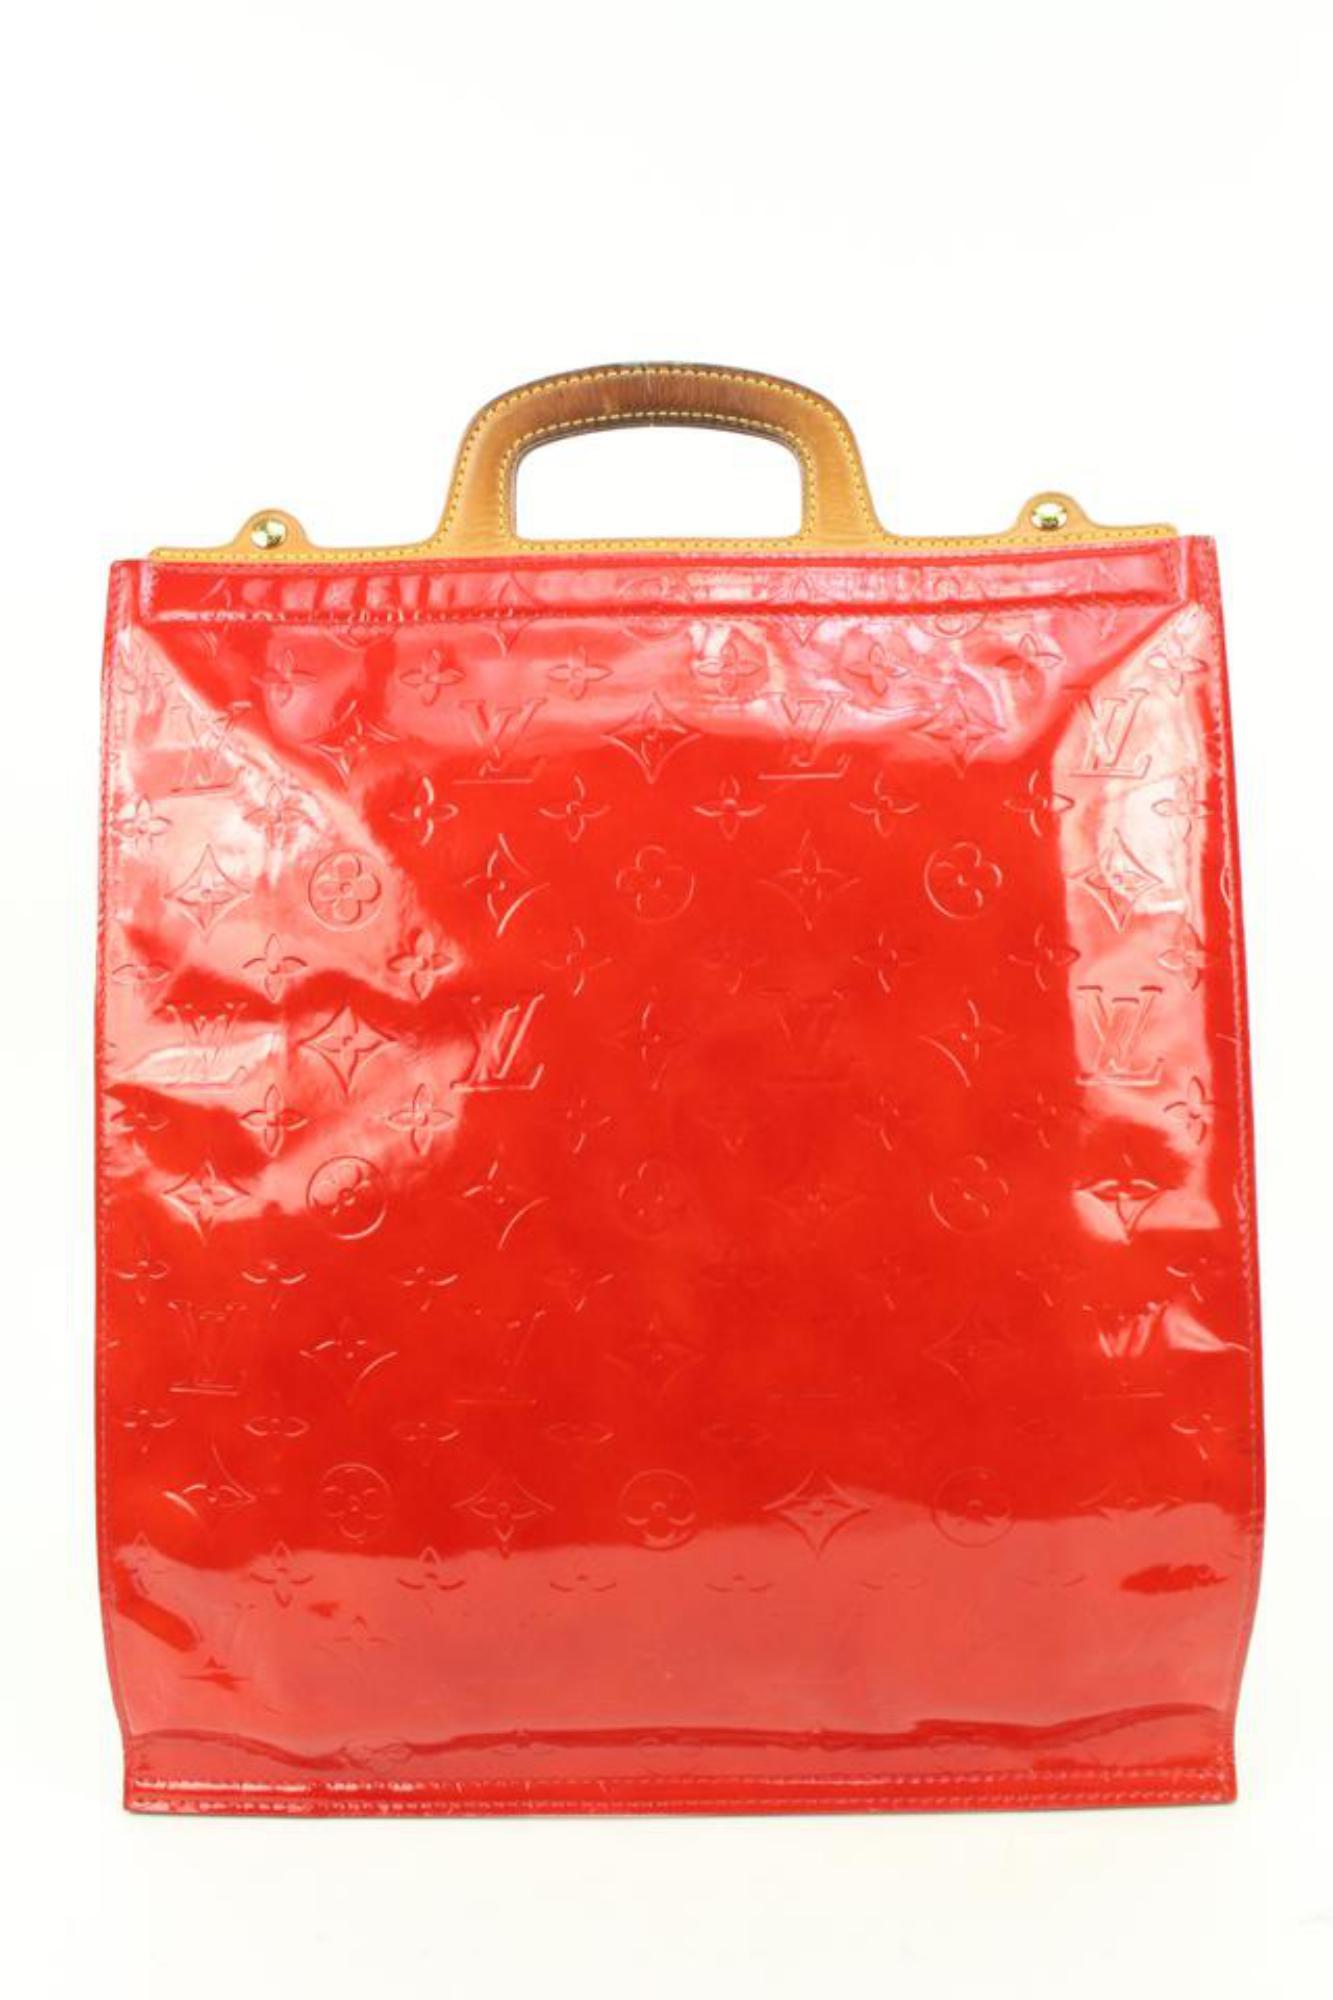 Women's Louis Vuitton Red Monogram Vernis Stanton Tote Bag Upcycle Ready 329slk3 For Sale